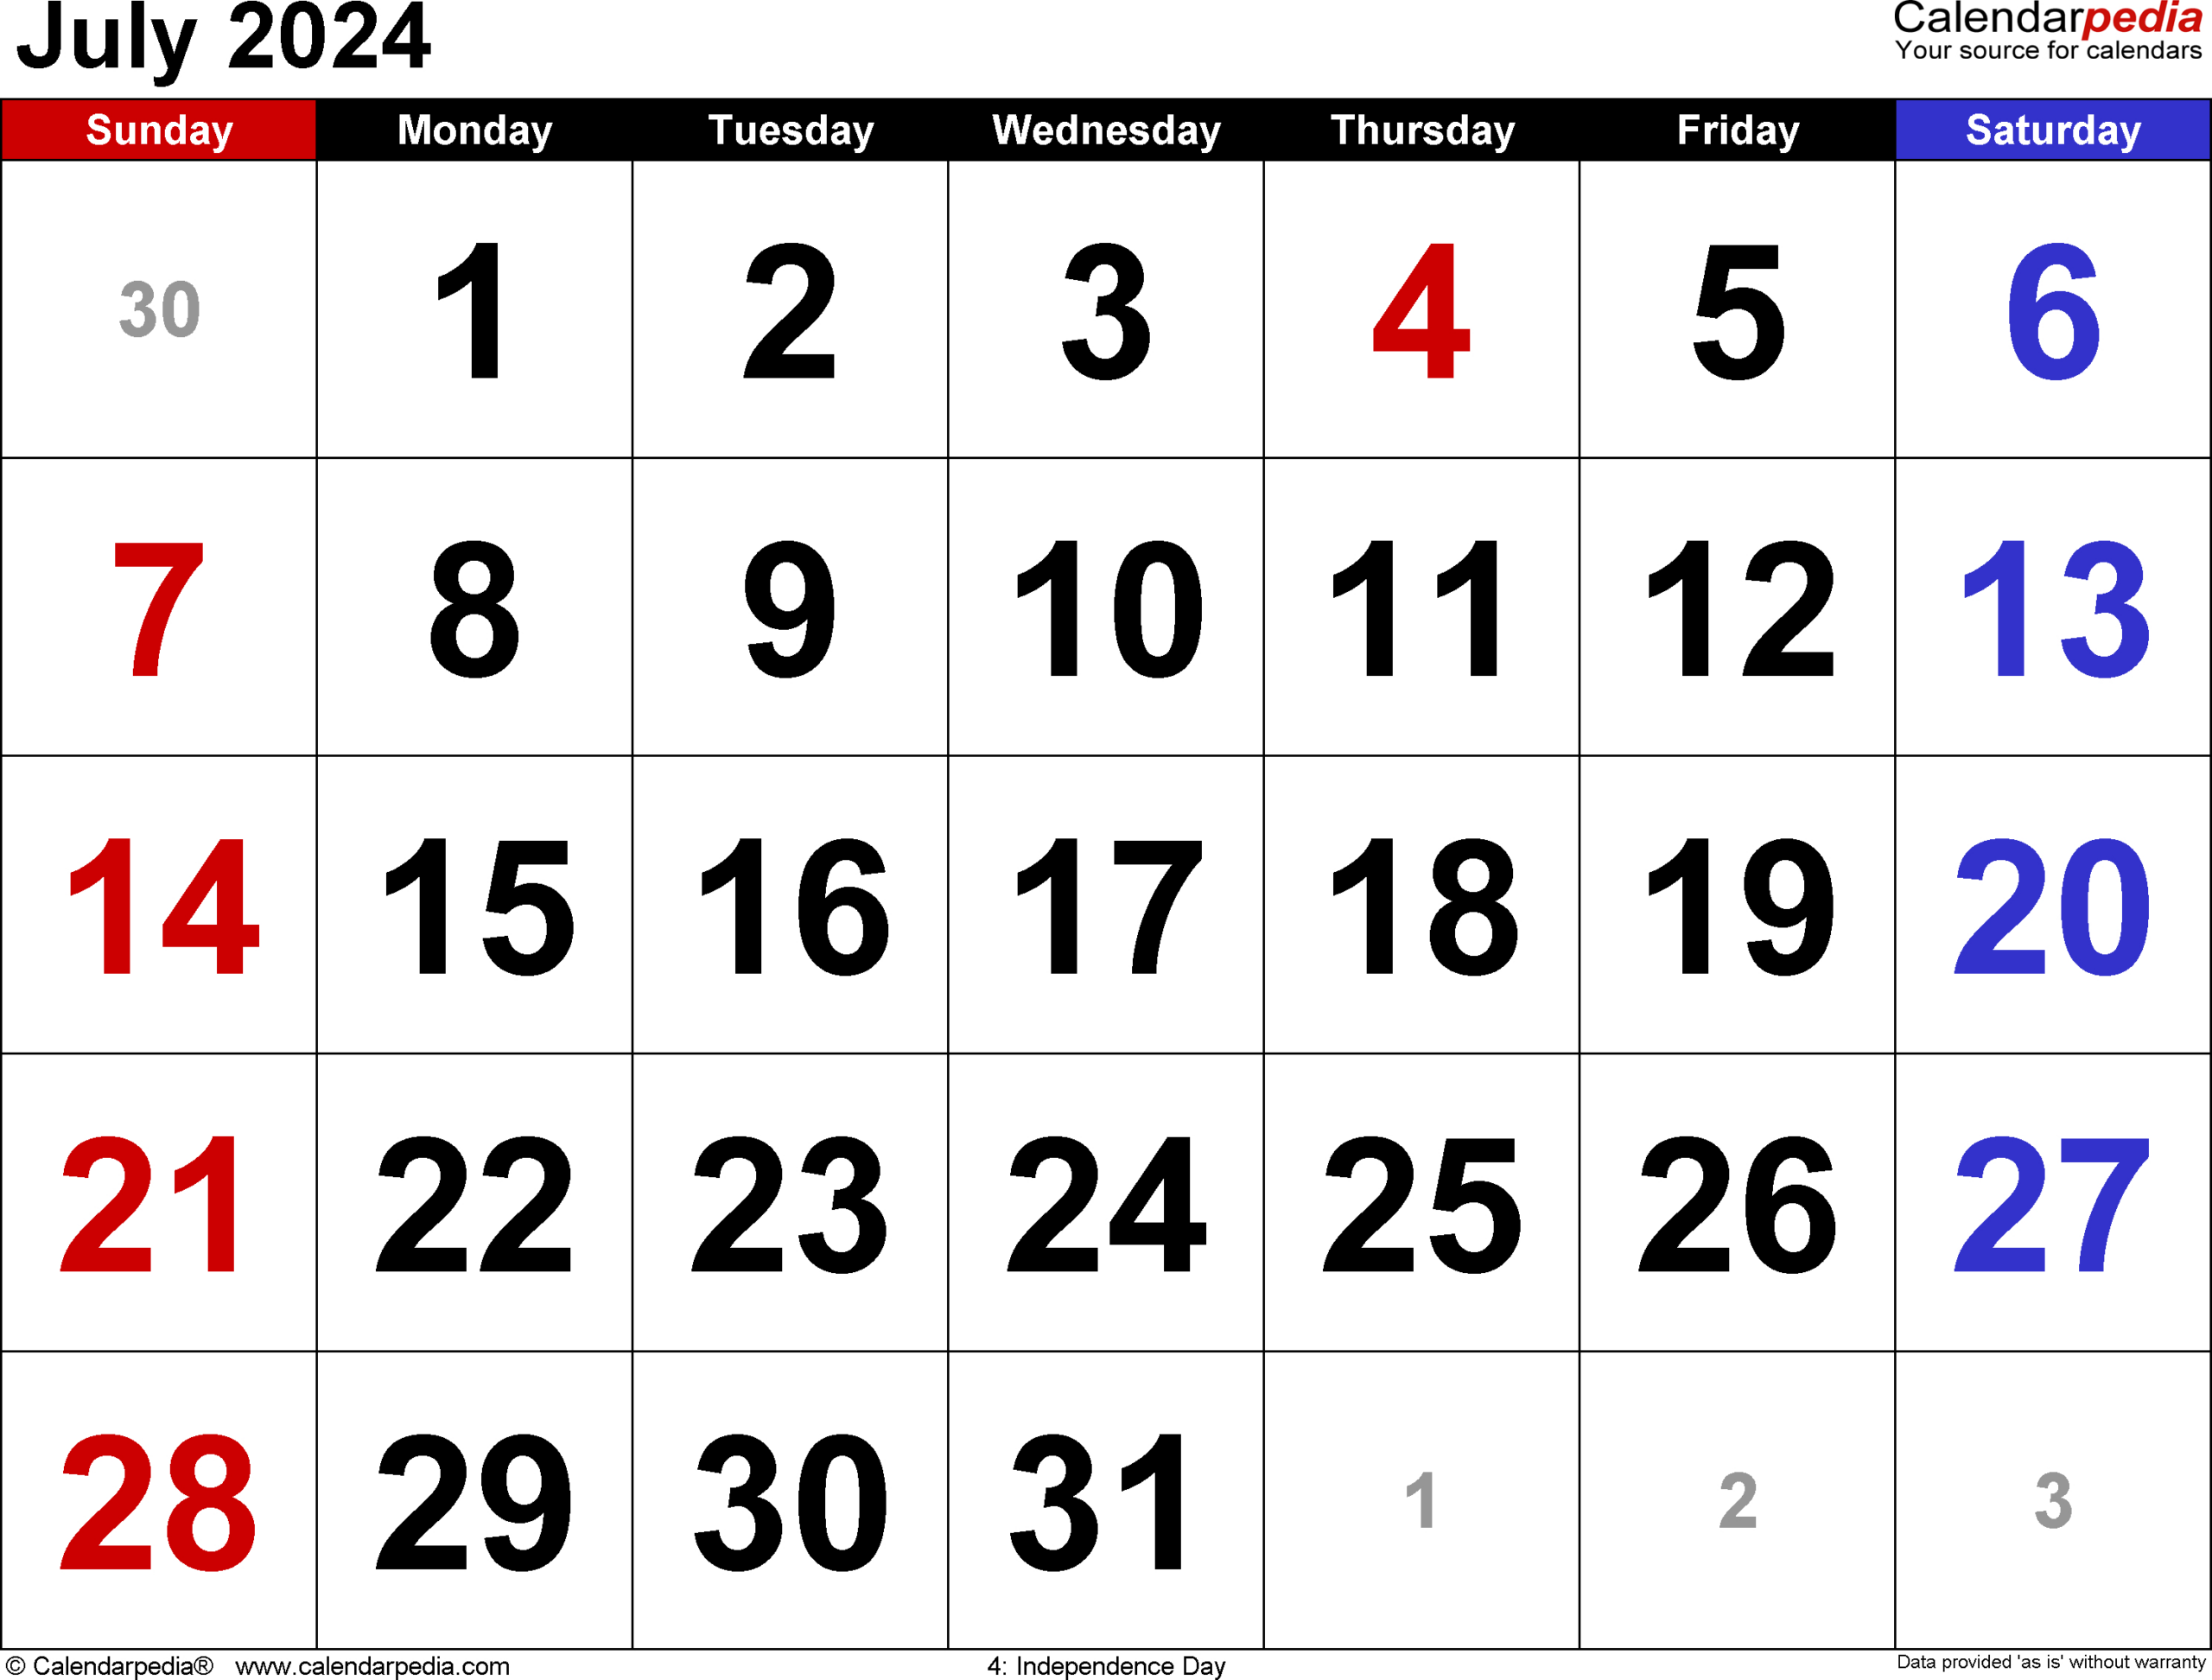 July 2024 Calendar | Templates For Word, Excel And Pdf within Philippine Calendar July 2024